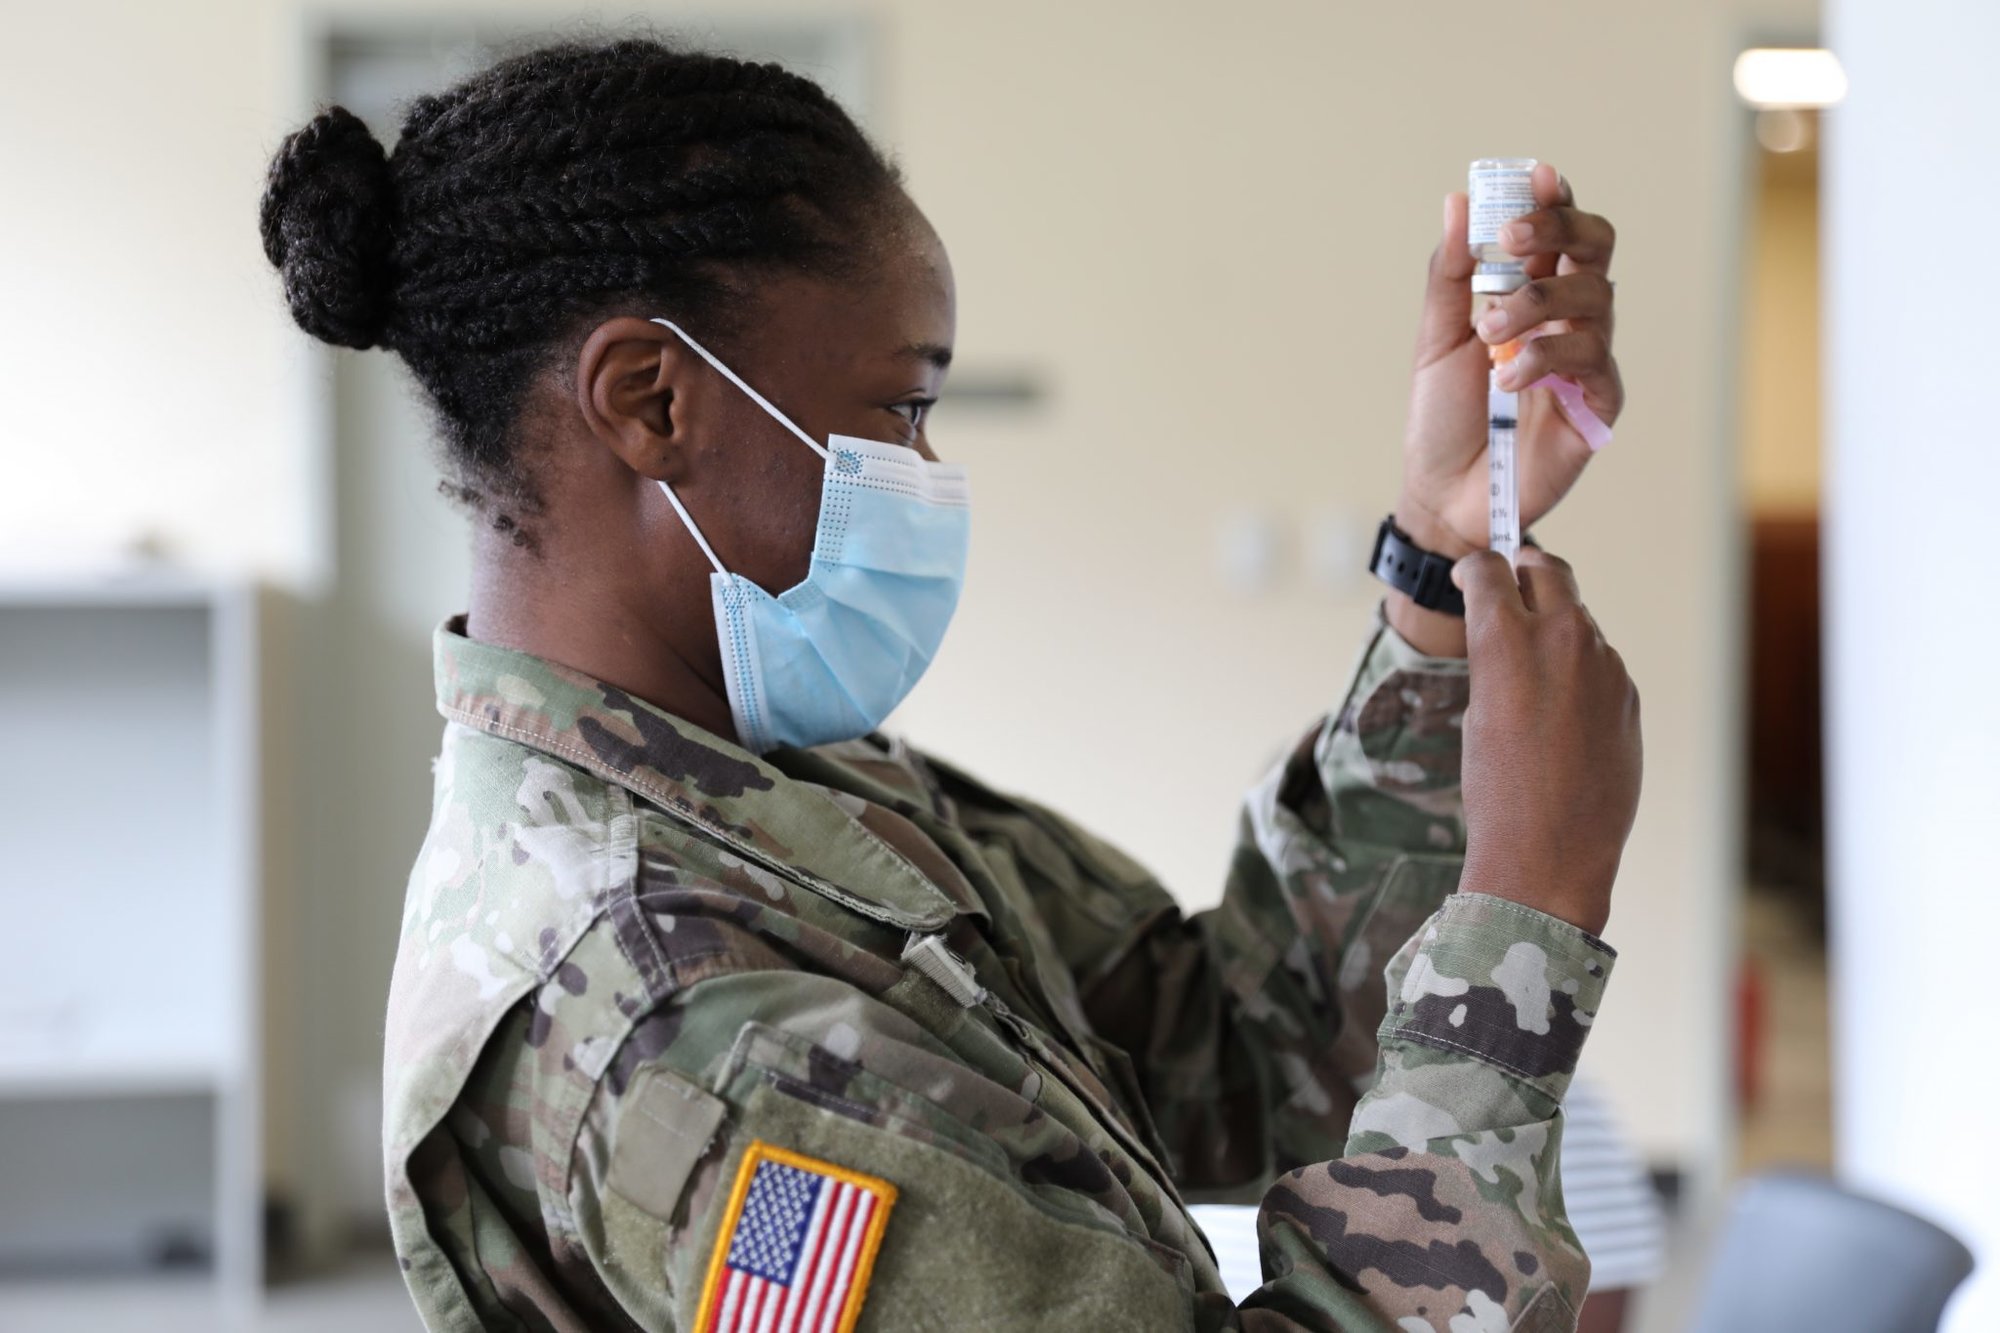 Republican lawmakers do not believe a Pentagon-wide vaccine mandate is legal under current “emergency” approvals, but full approval for most COVID-19 vaccinations is expected soon. US Army National Guard photo by Sgt. Leona C. Hendrickson.